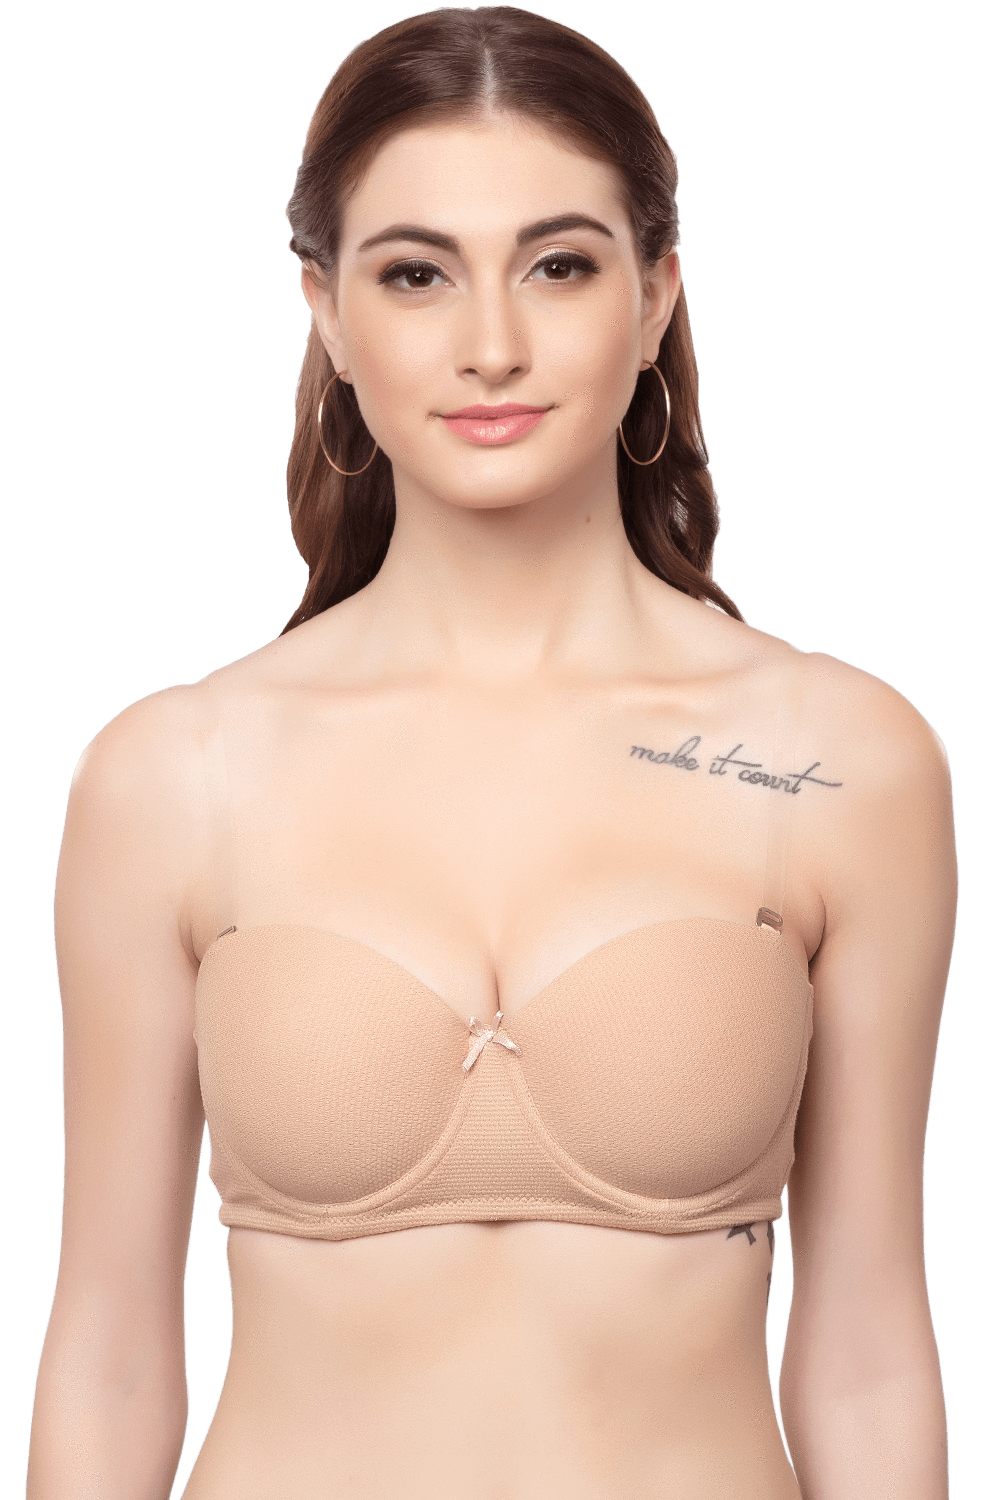 Buy Online Organic Cotton Antimicrobial Padded Strapless Bra